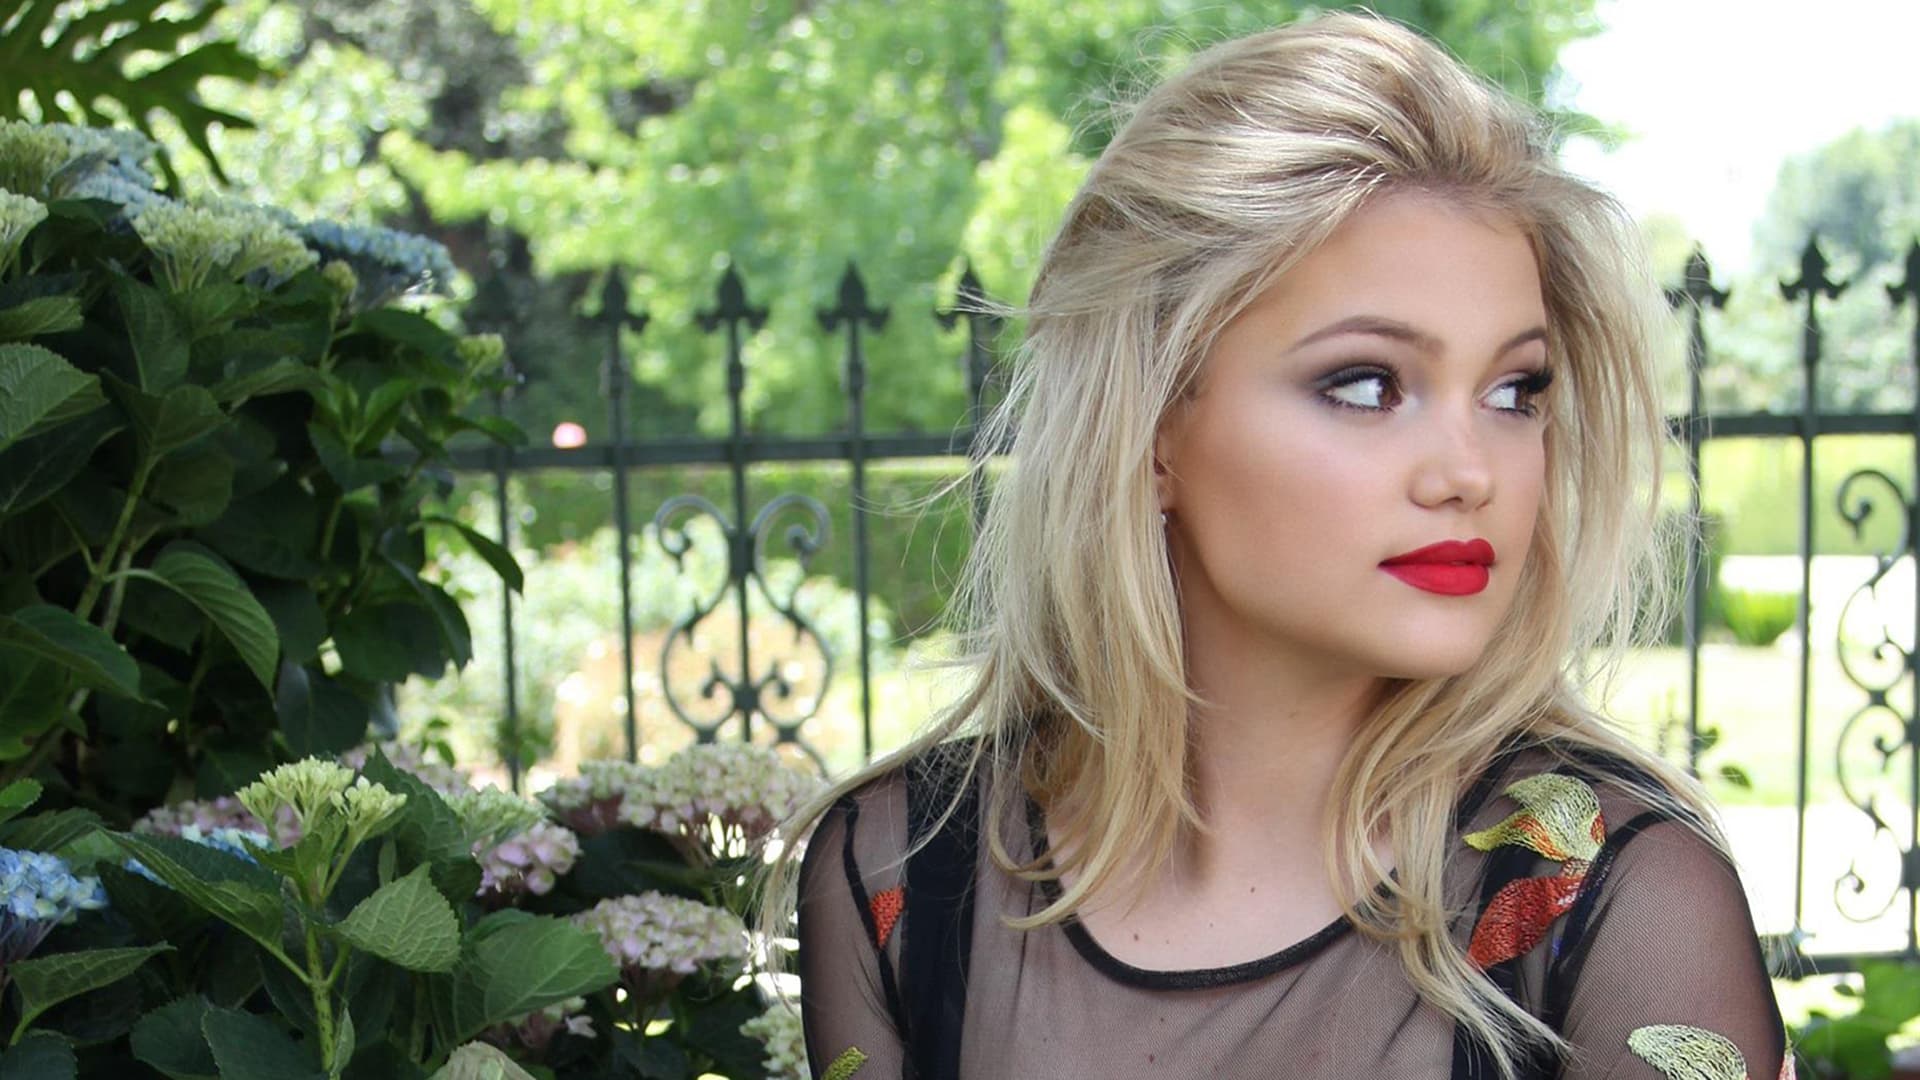 Olivia Holt Wallpaper Picture 55248 1920x1080 px